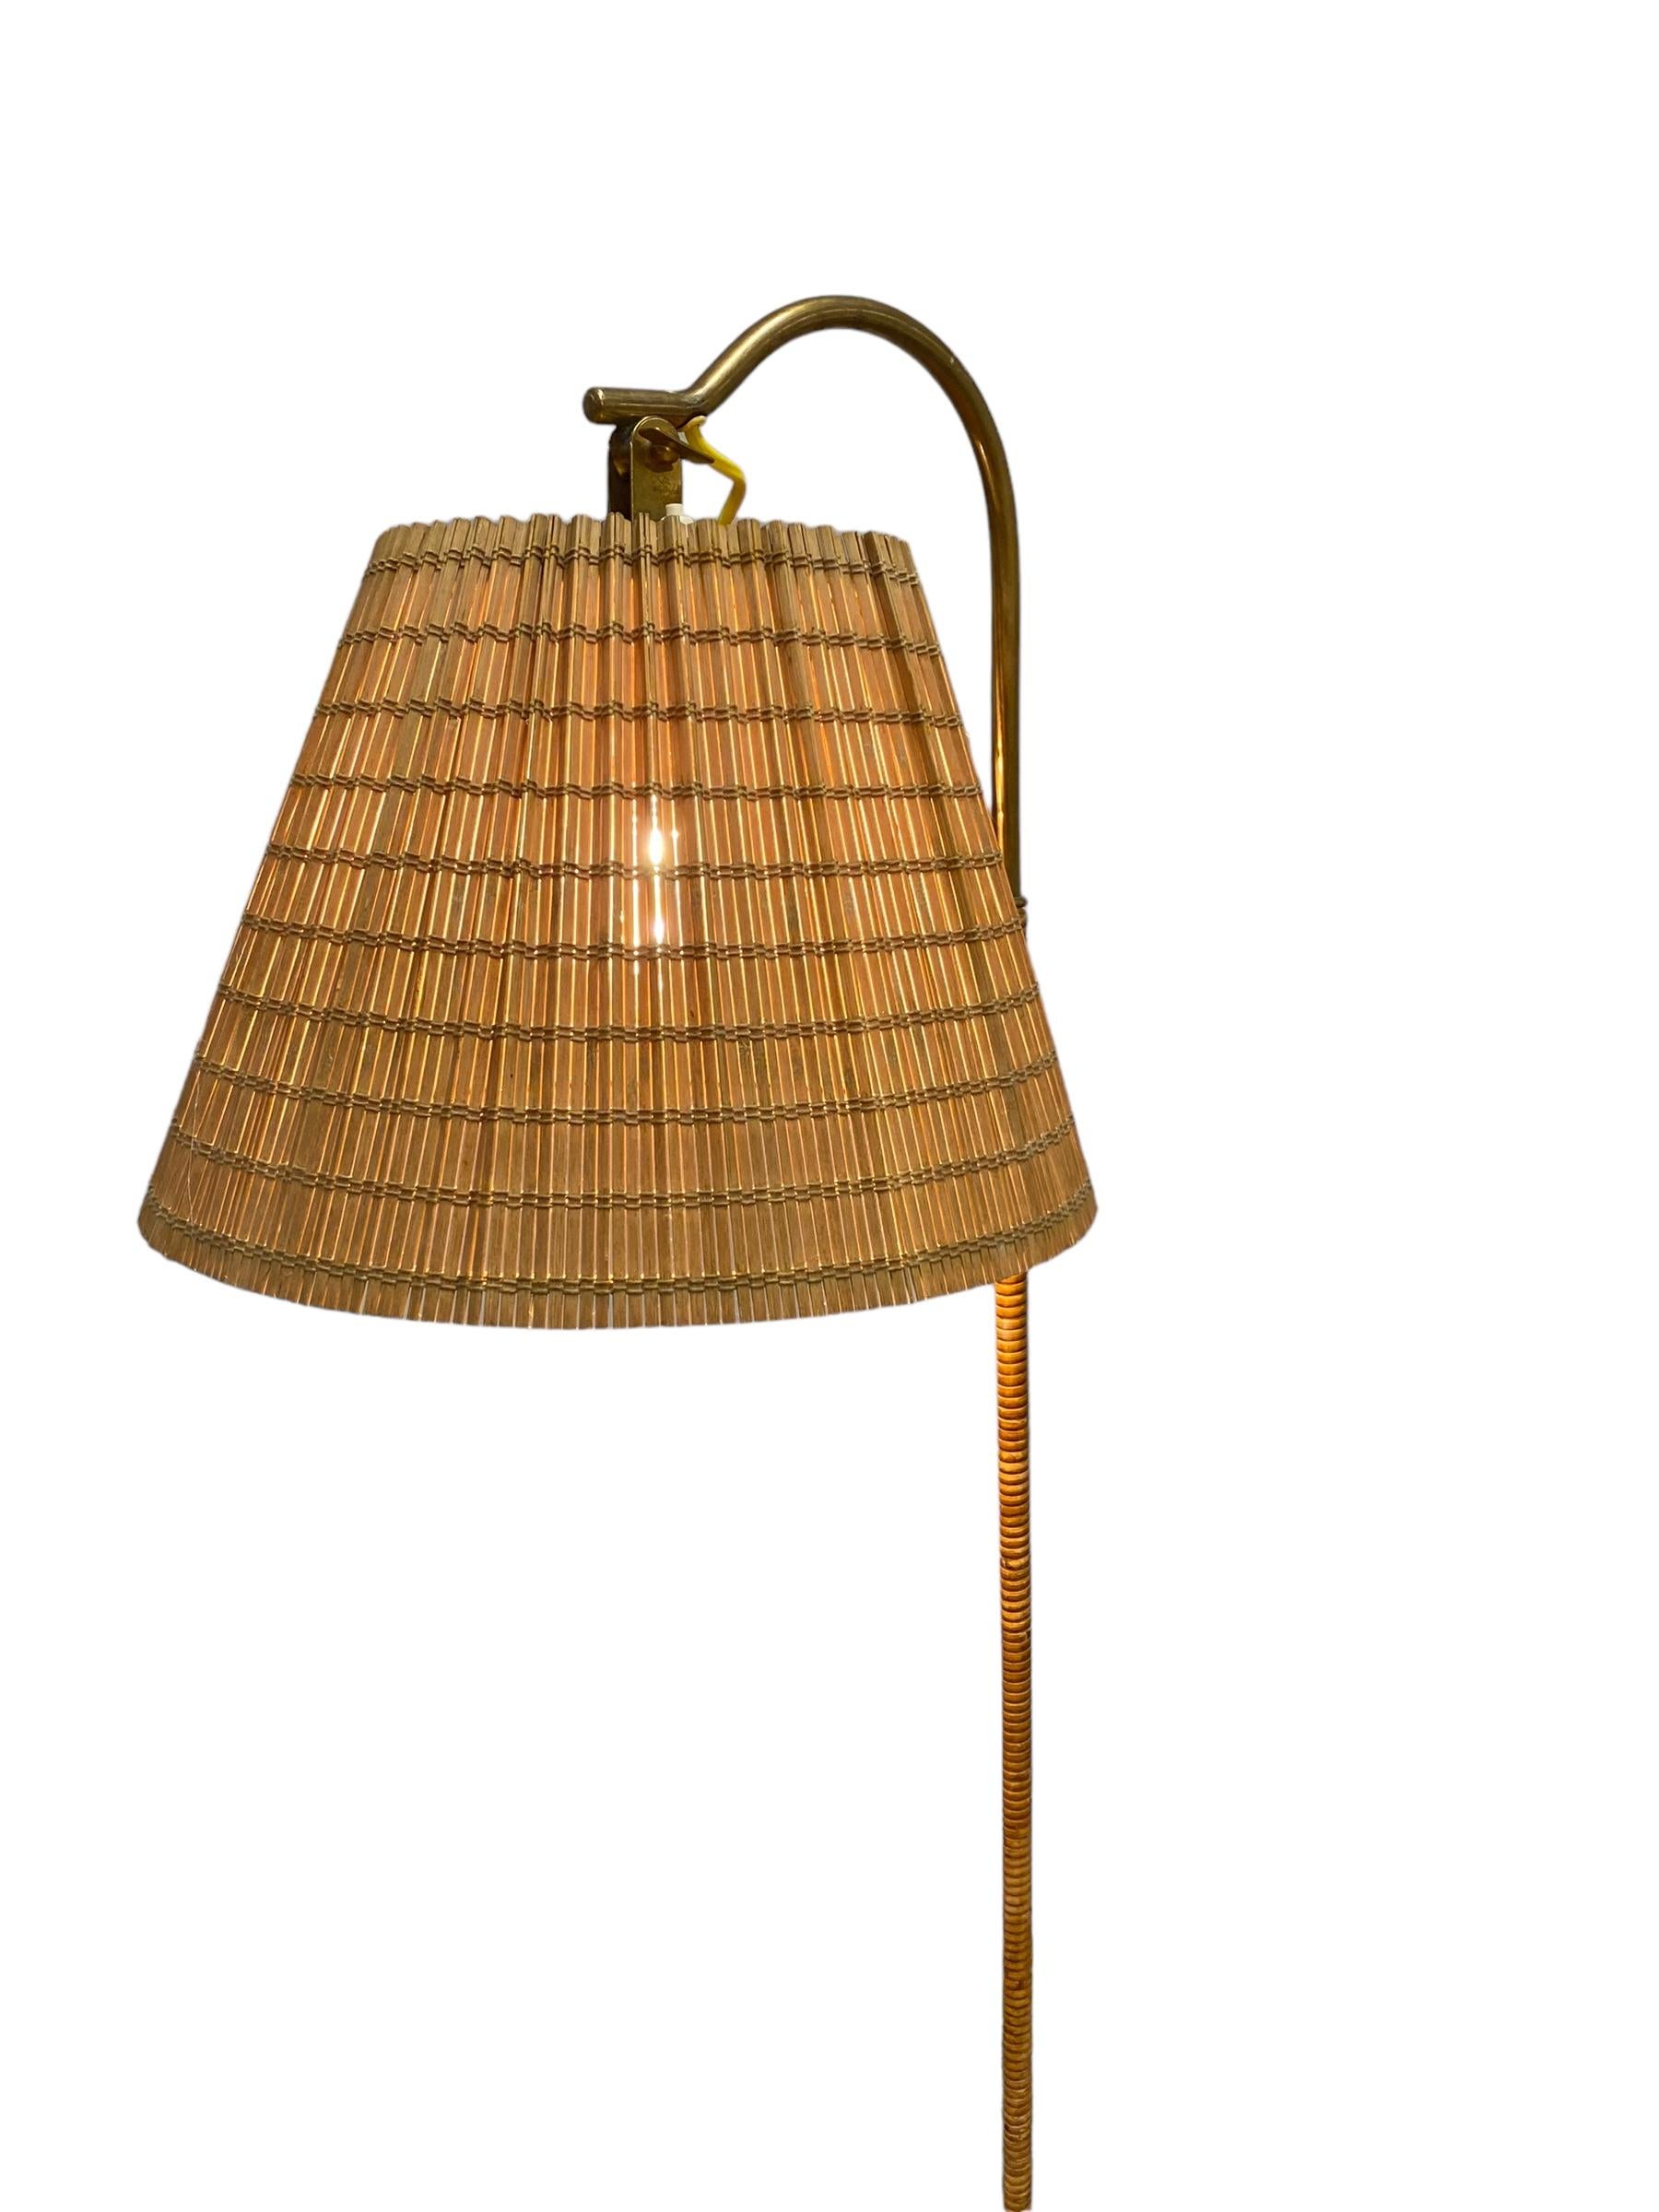 Brass Paavo Tynell Floor Lamp model. 9609, Taito Oy 1950s For Sale